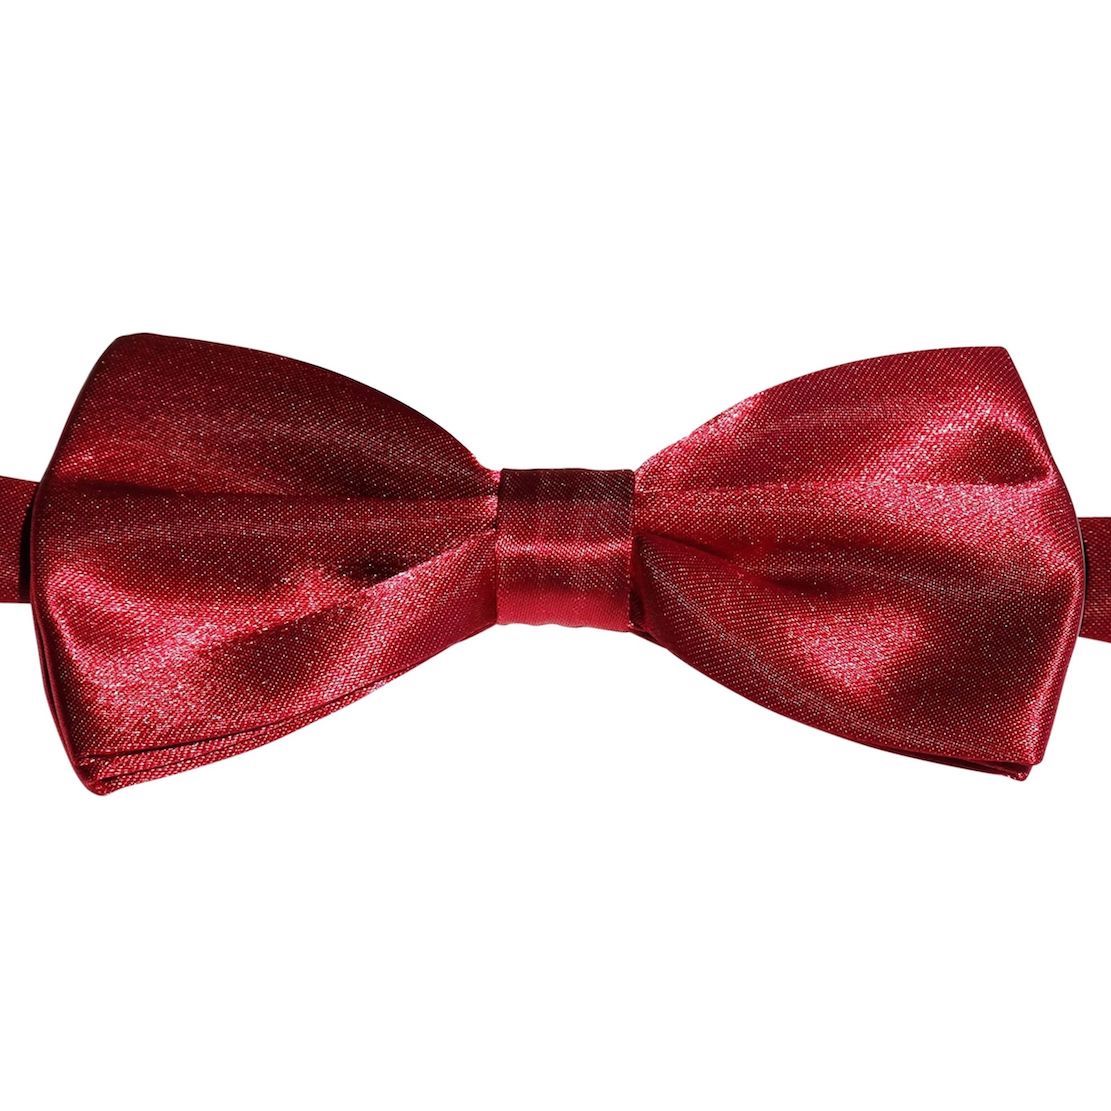 Red Bow Tie - ALEX PALAUS Collection